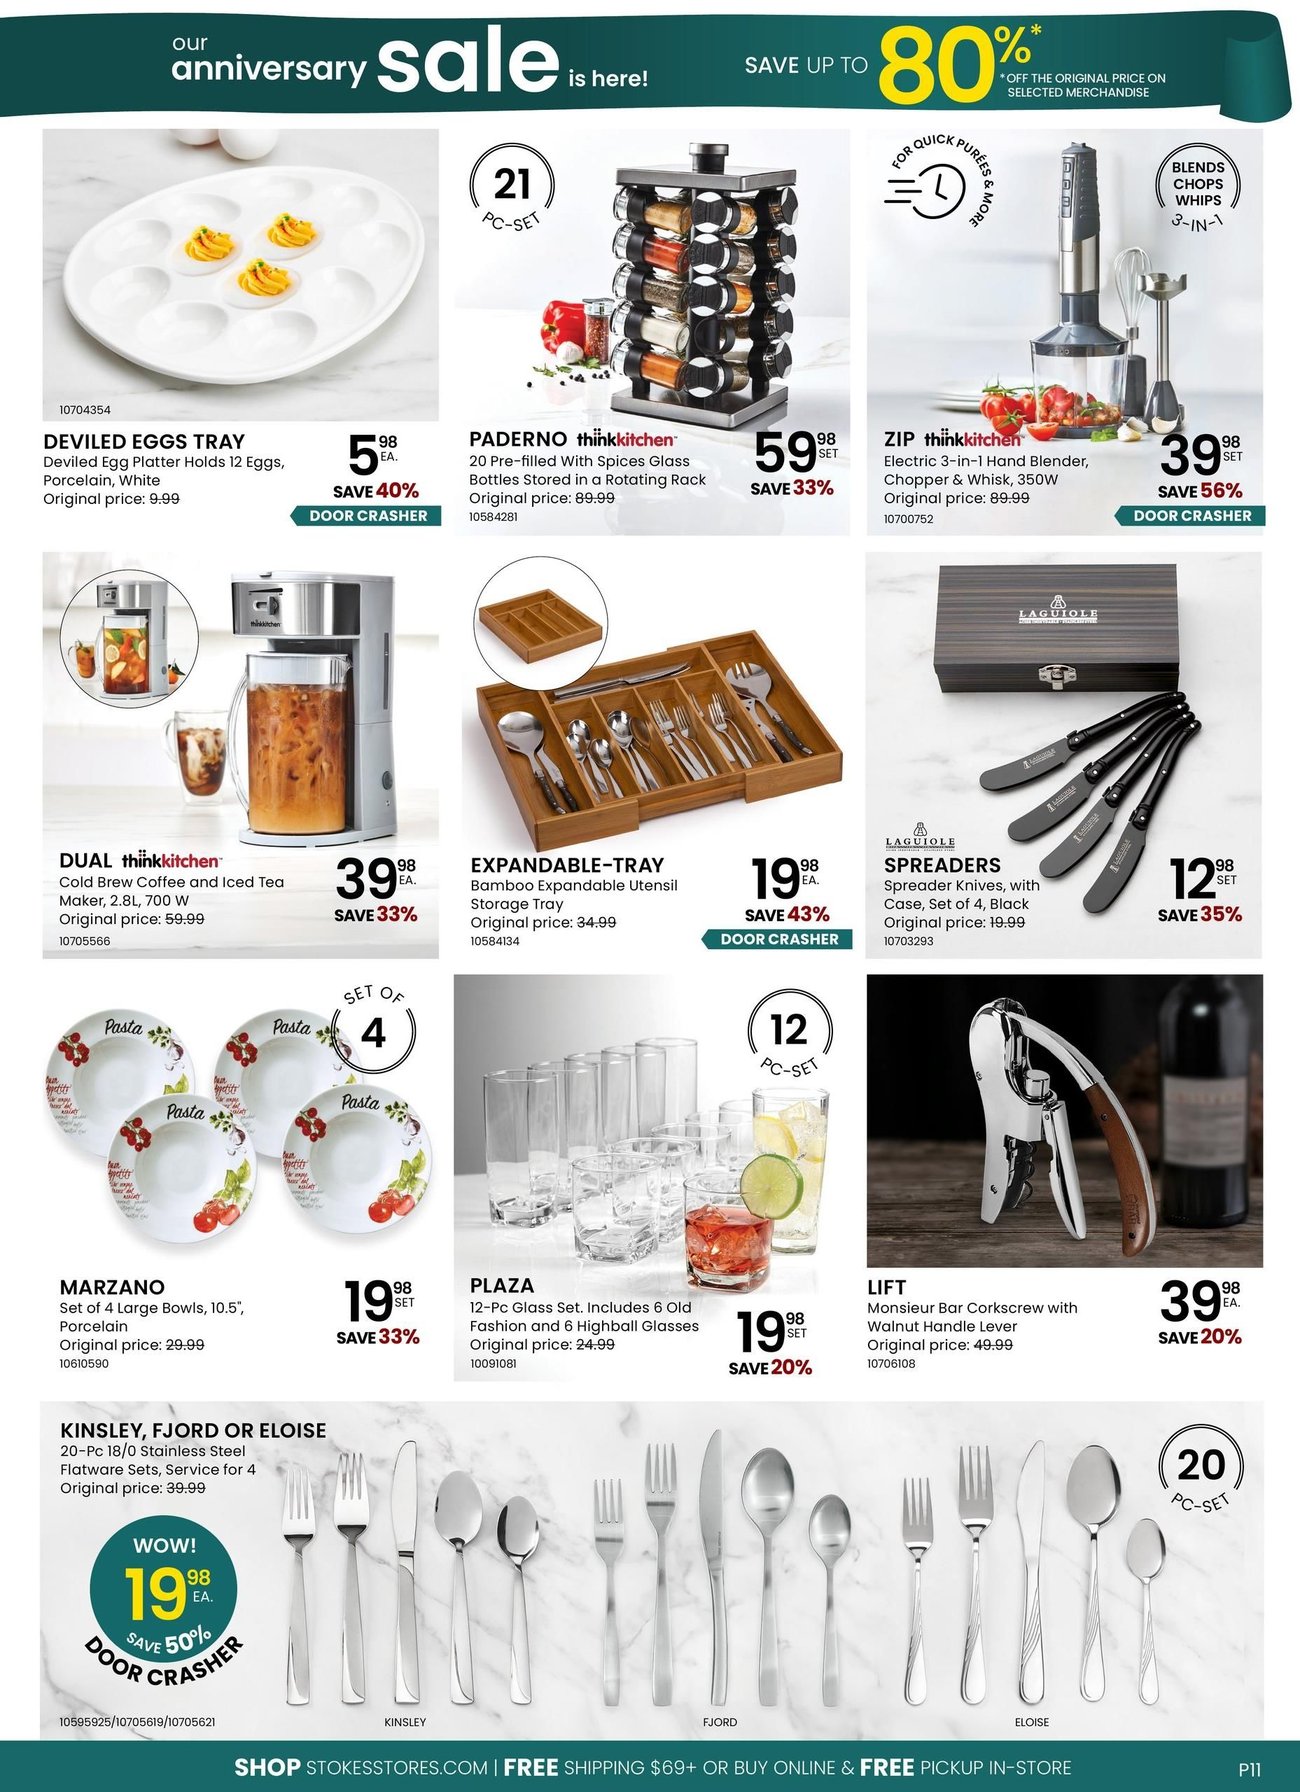 Stokes - Monthly Specials - Page 3